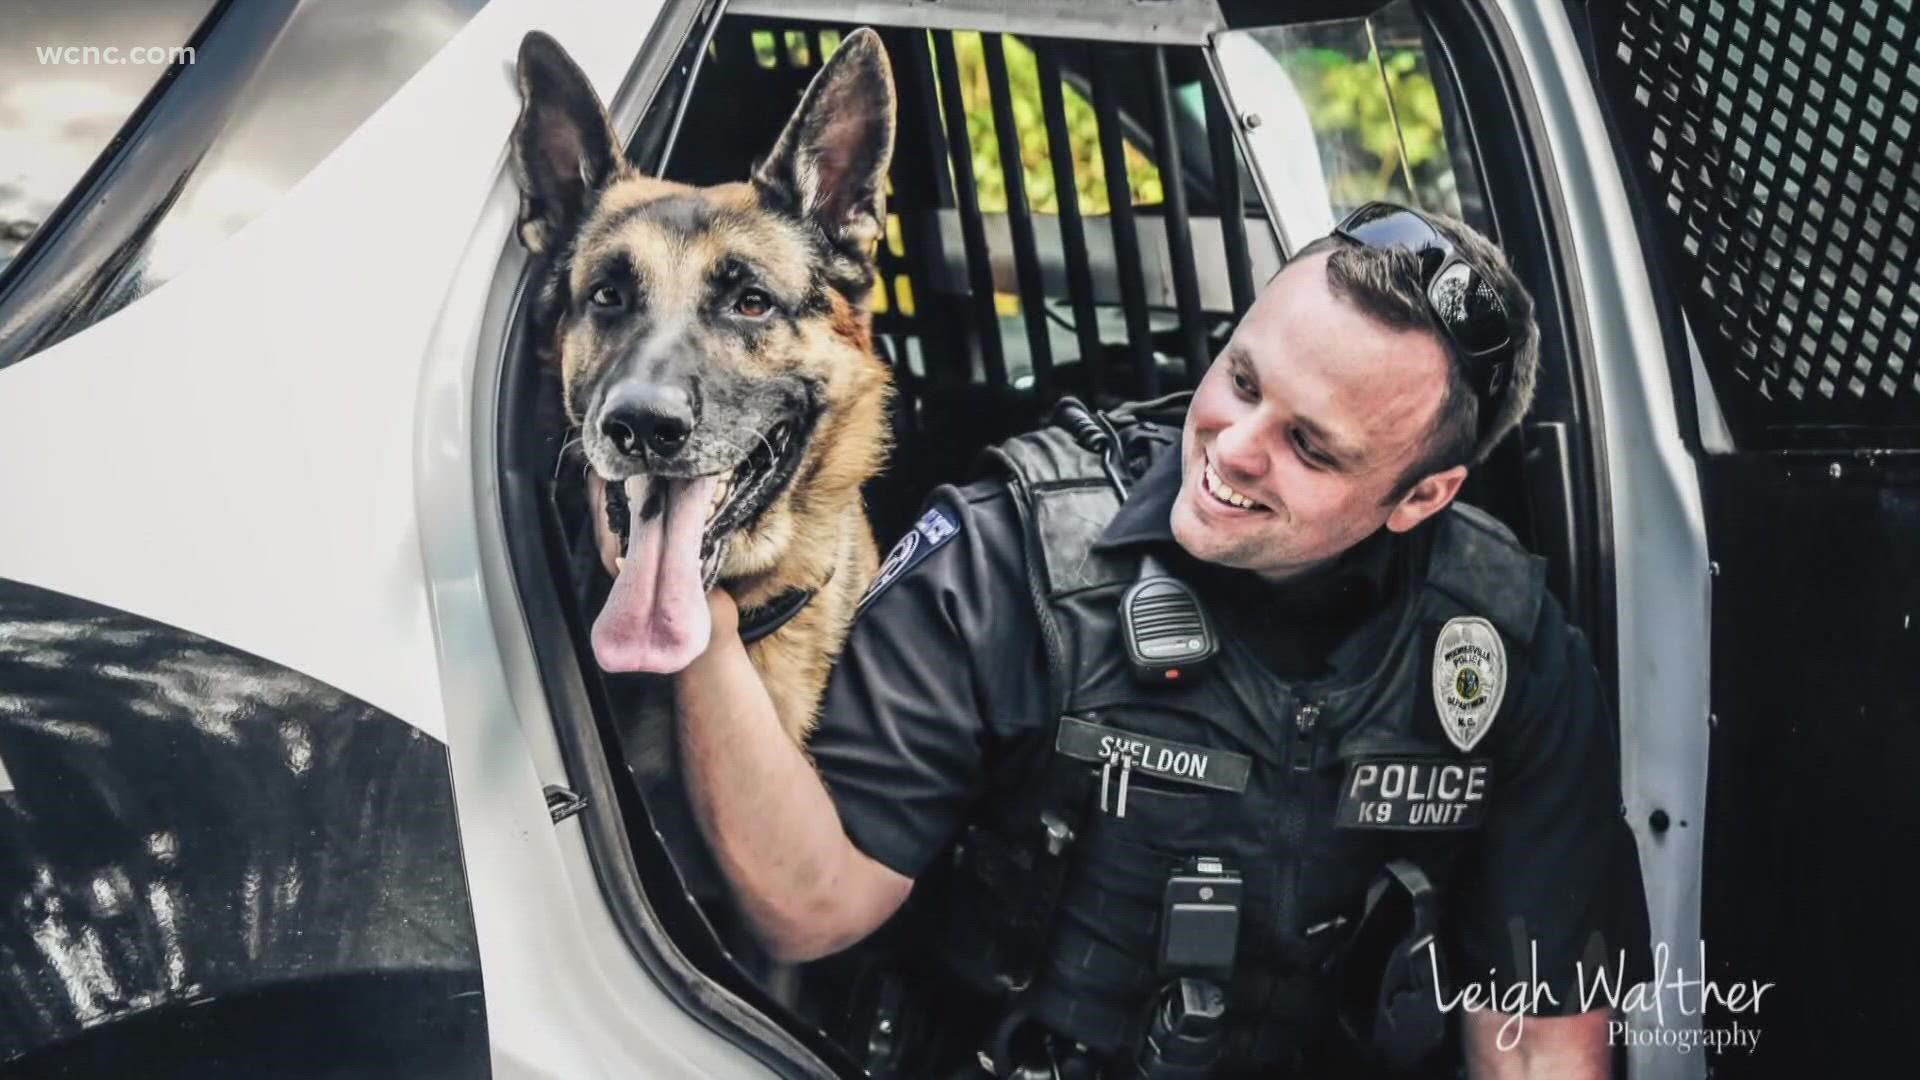 Loki's death comes nearly three years after Officer Sheldon was fatally shot during a traffic stop in 2019.